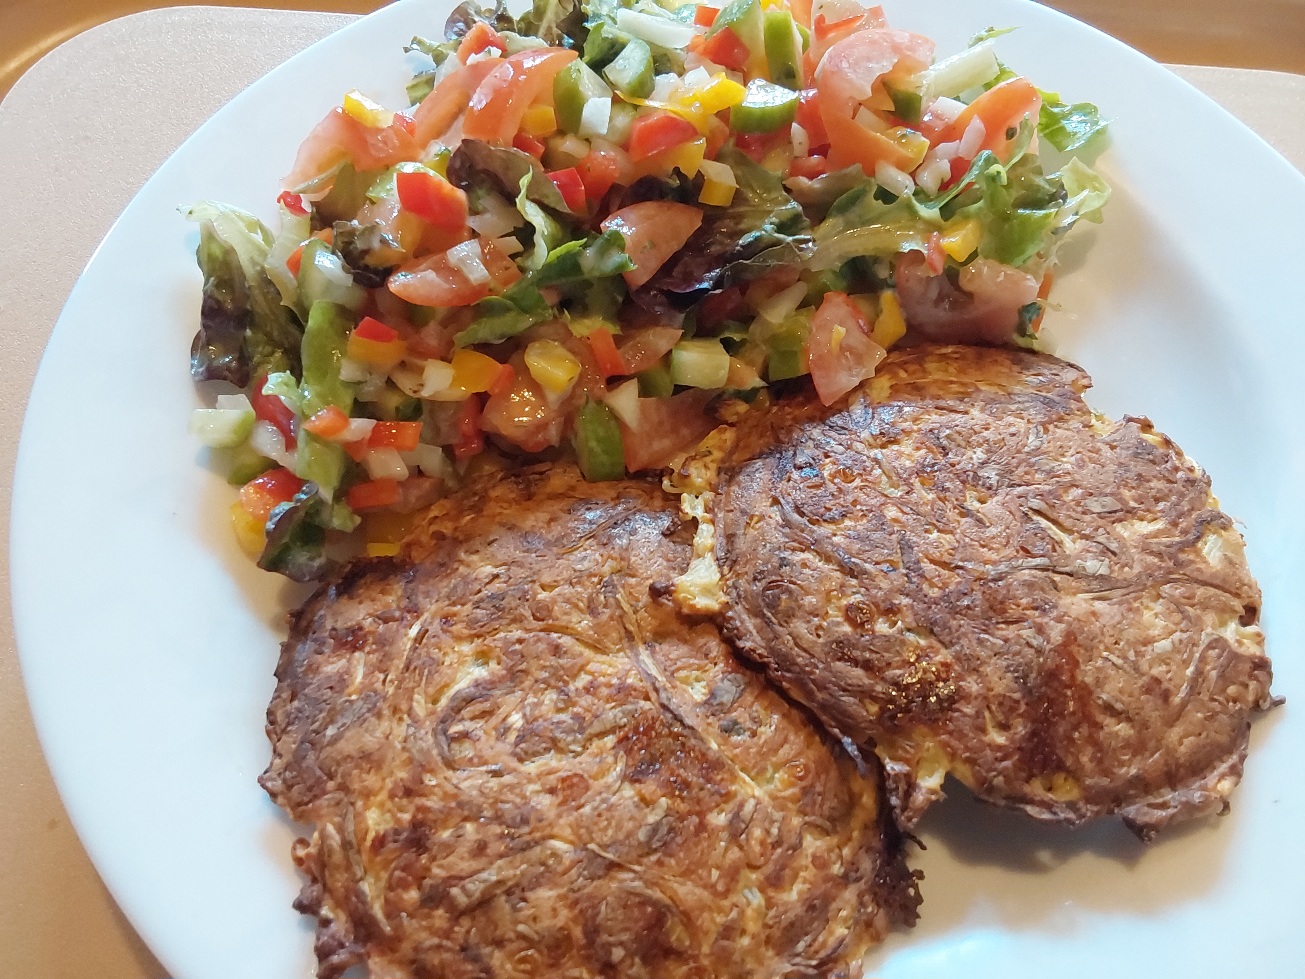 Plate of vegetable fritters served with salad